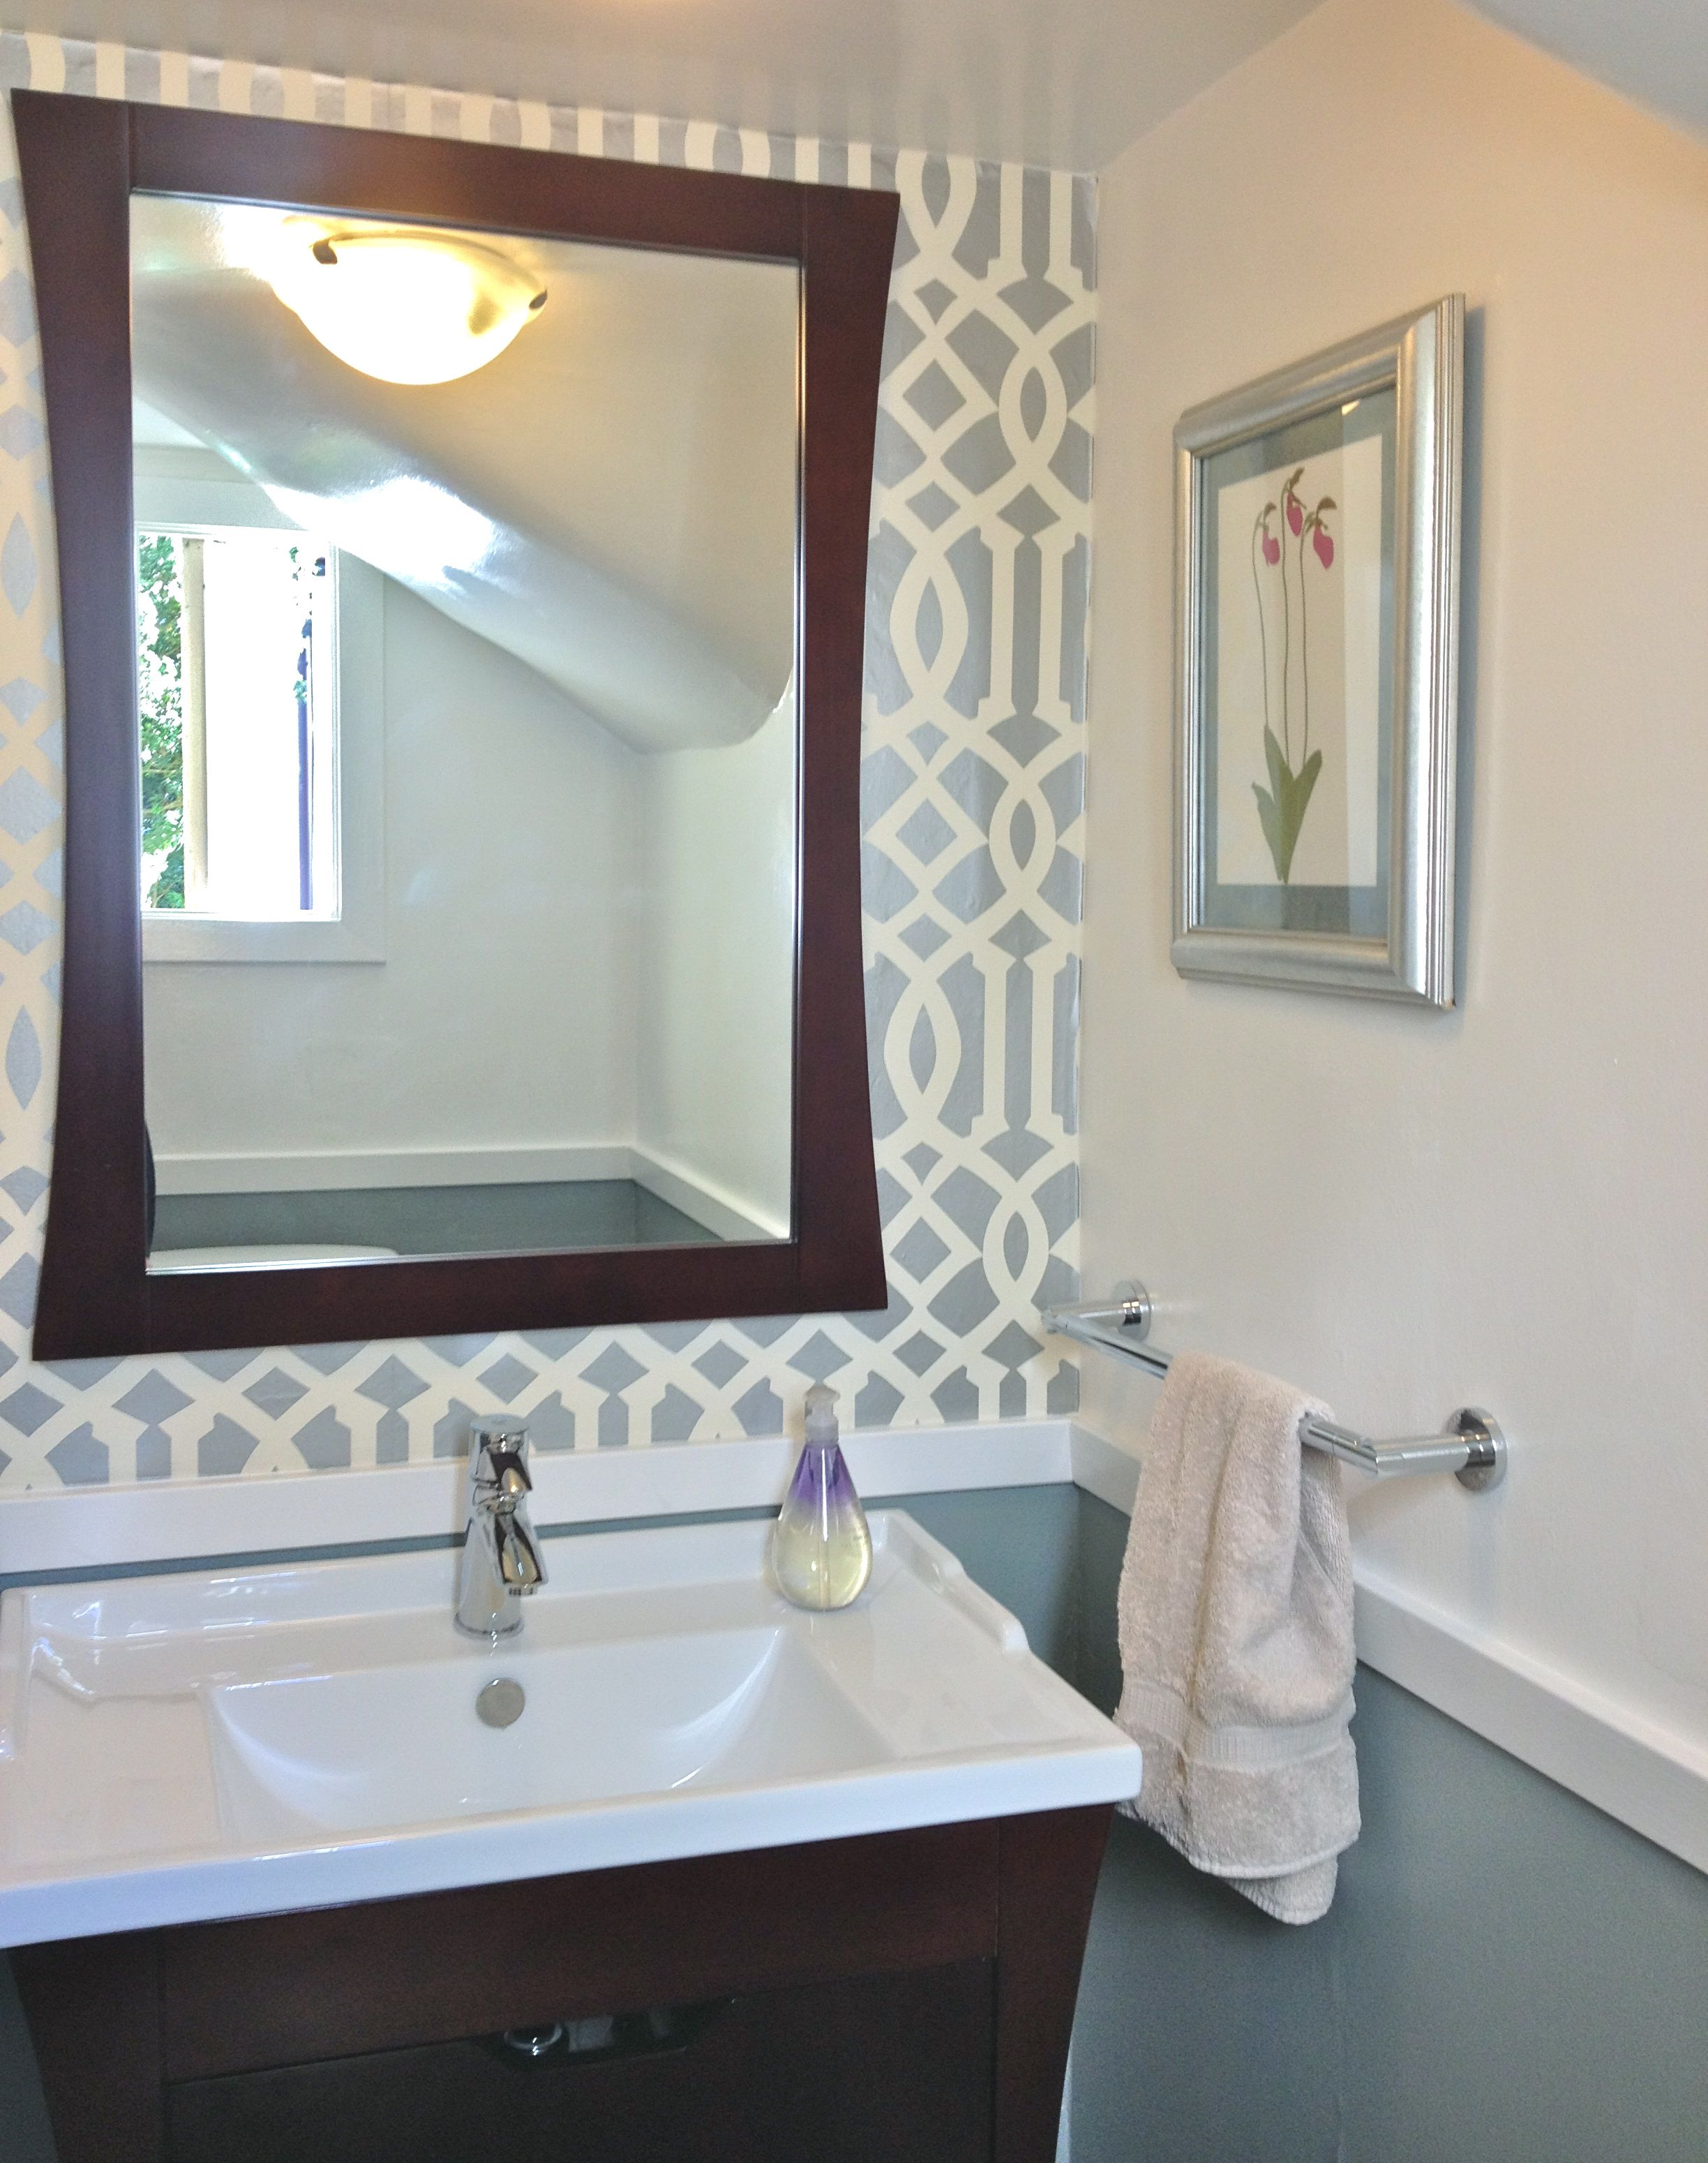 Details, Like The Imperial Trellis Wallpaper And New - Small Bathroom Wallpaper Accent Wall - HD Wallpaper 